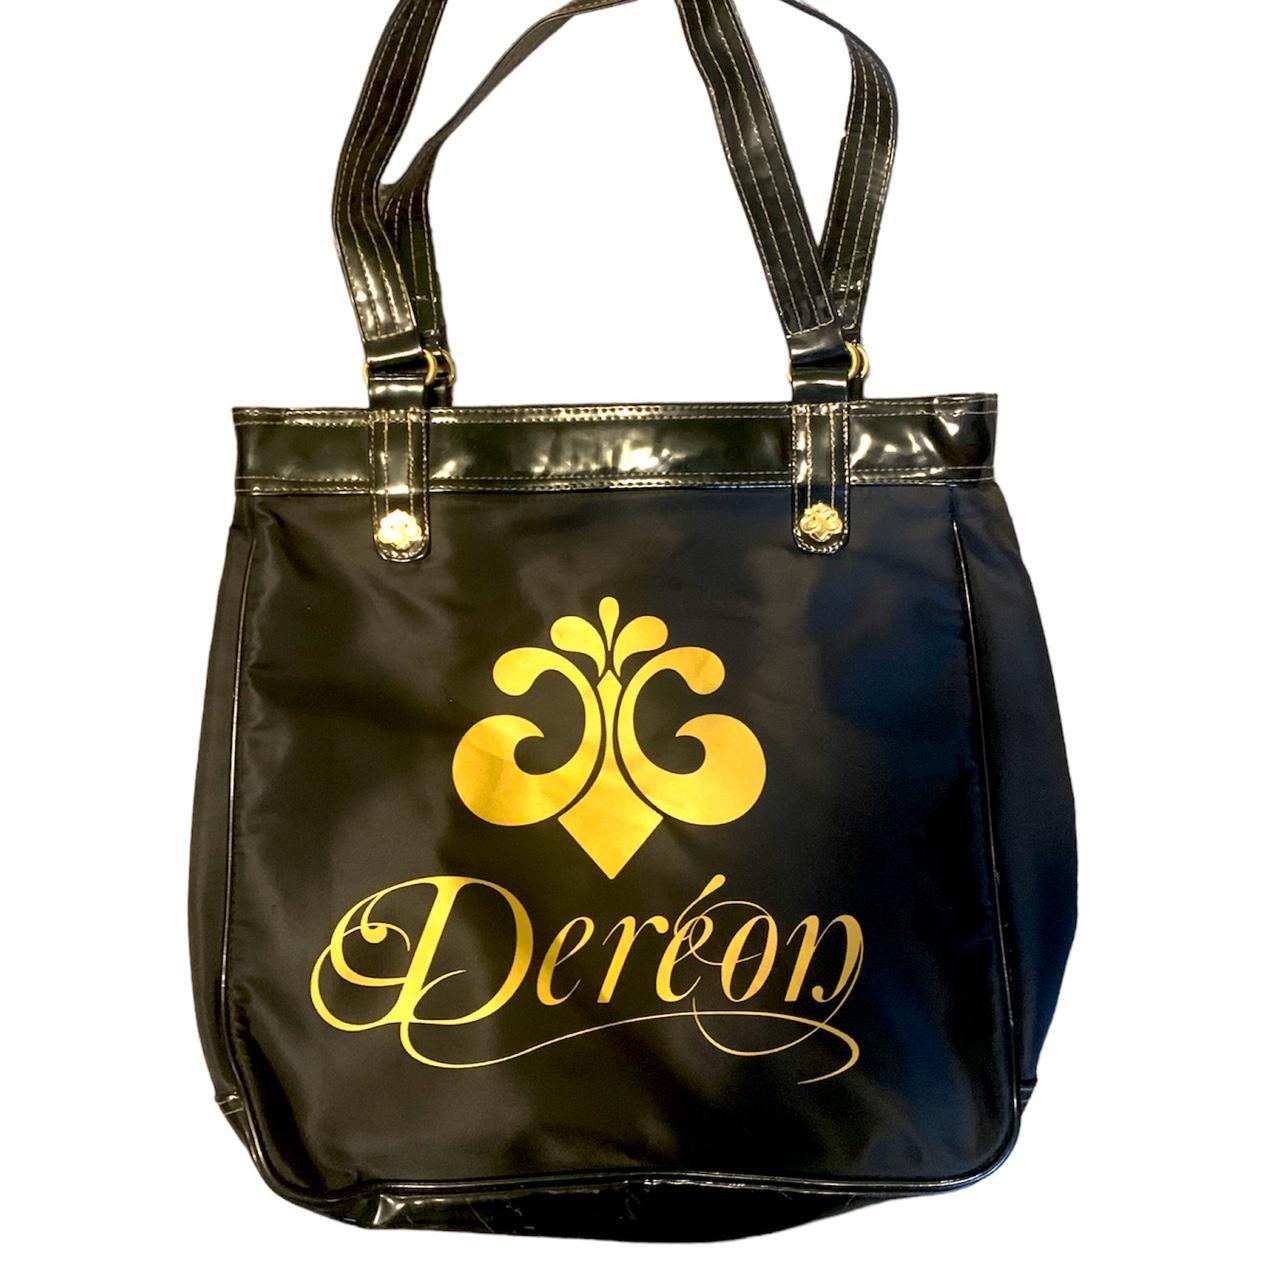 House Of Dereon Purse